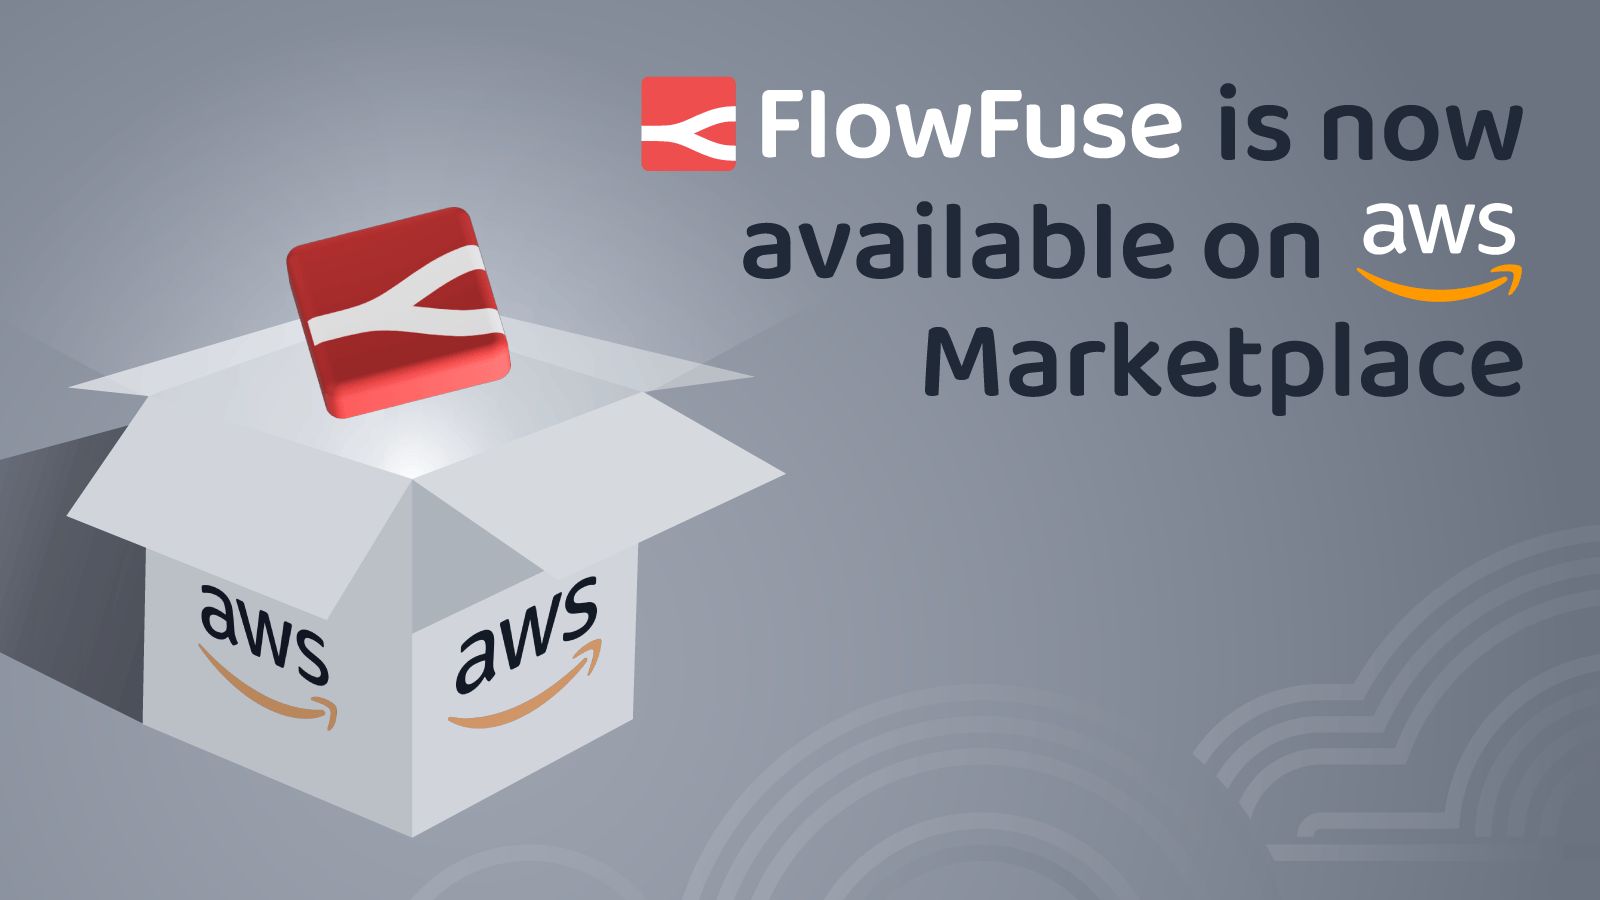 Image representing FlowFuse is now available on AWS Marketplace